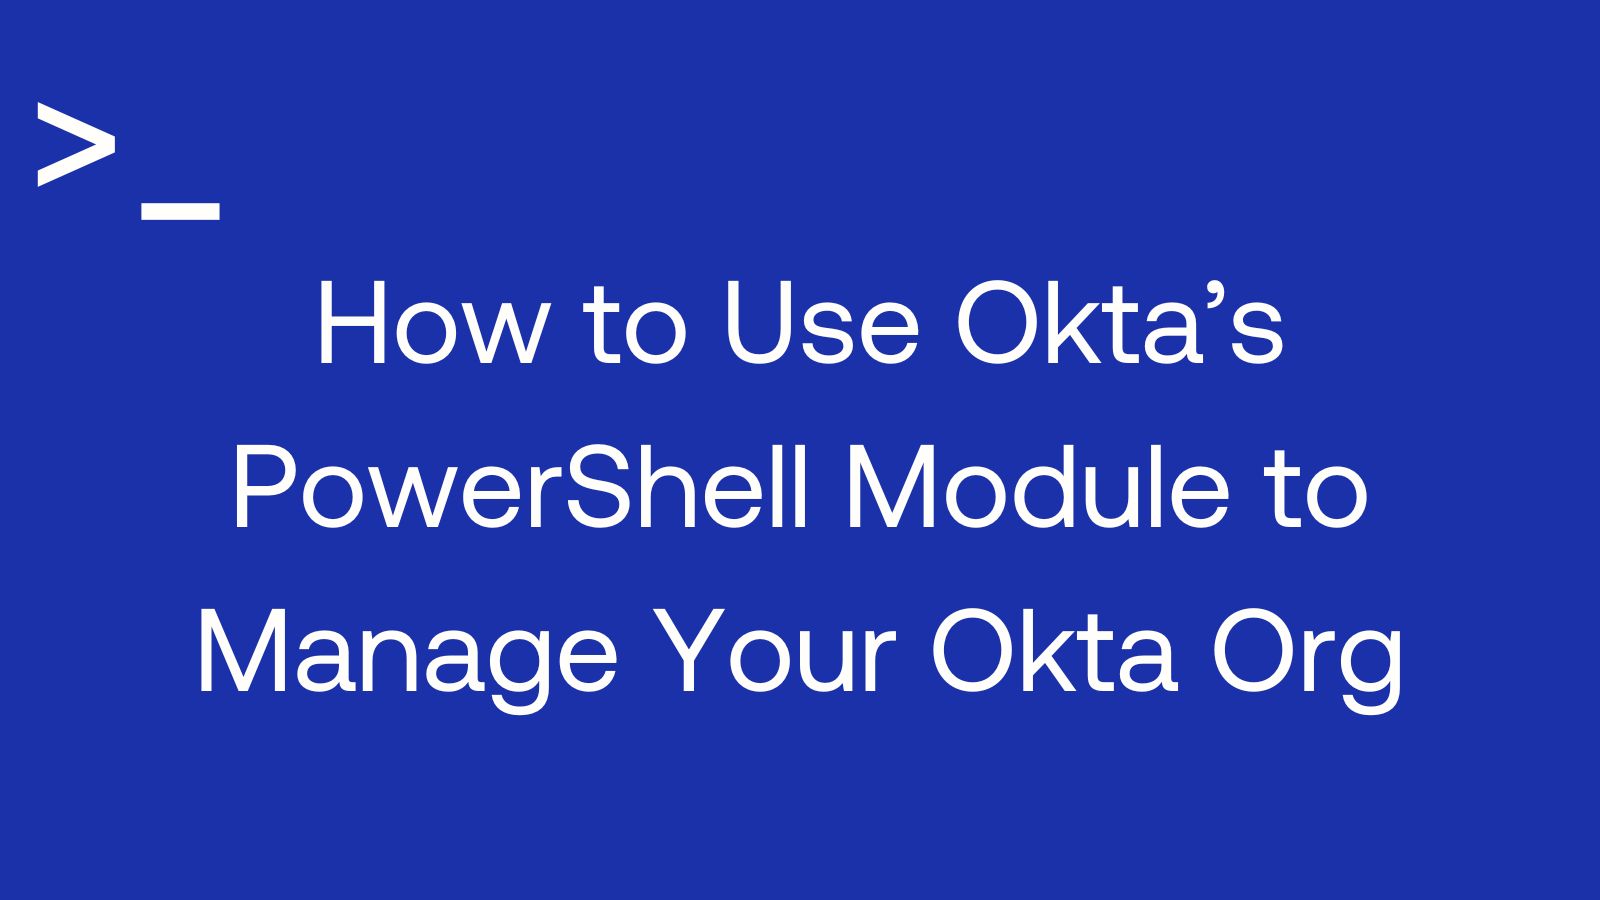 How to Use Okta's PowerShell Module to Manage Your Okta Org